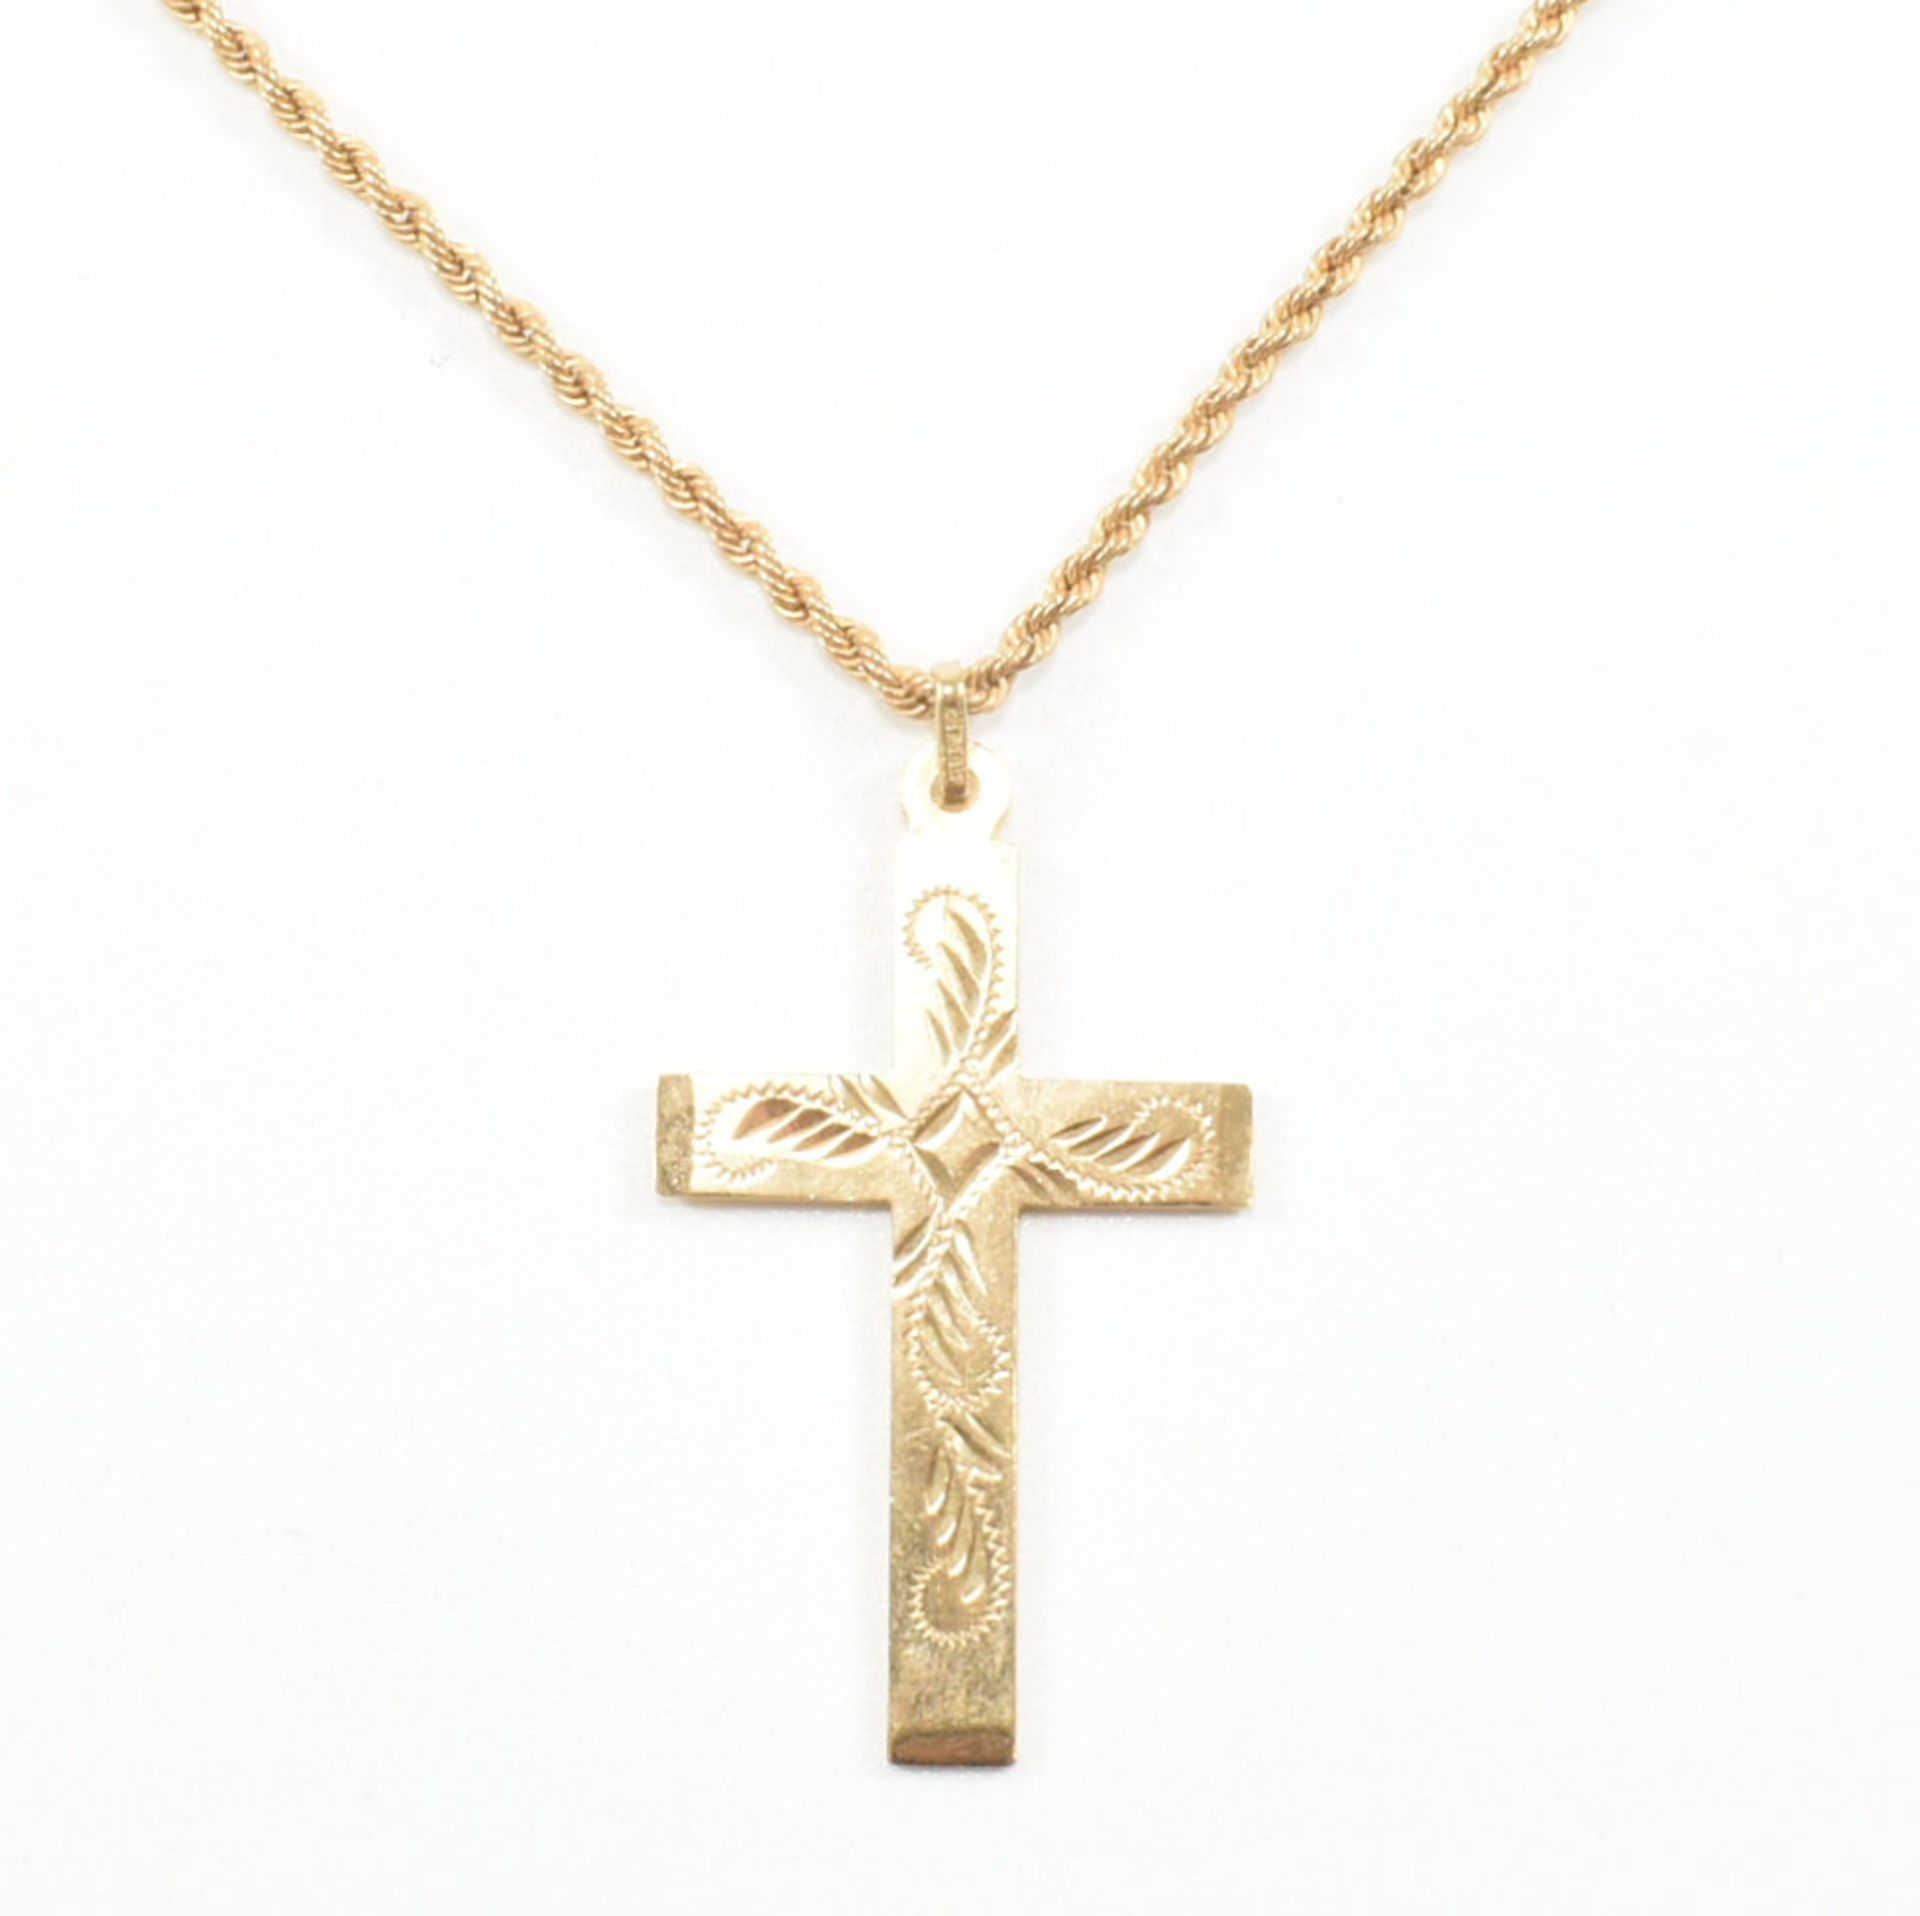 HALLMARKED 9CT GOLD PENDANT NECKLACE - Image 3 of 10